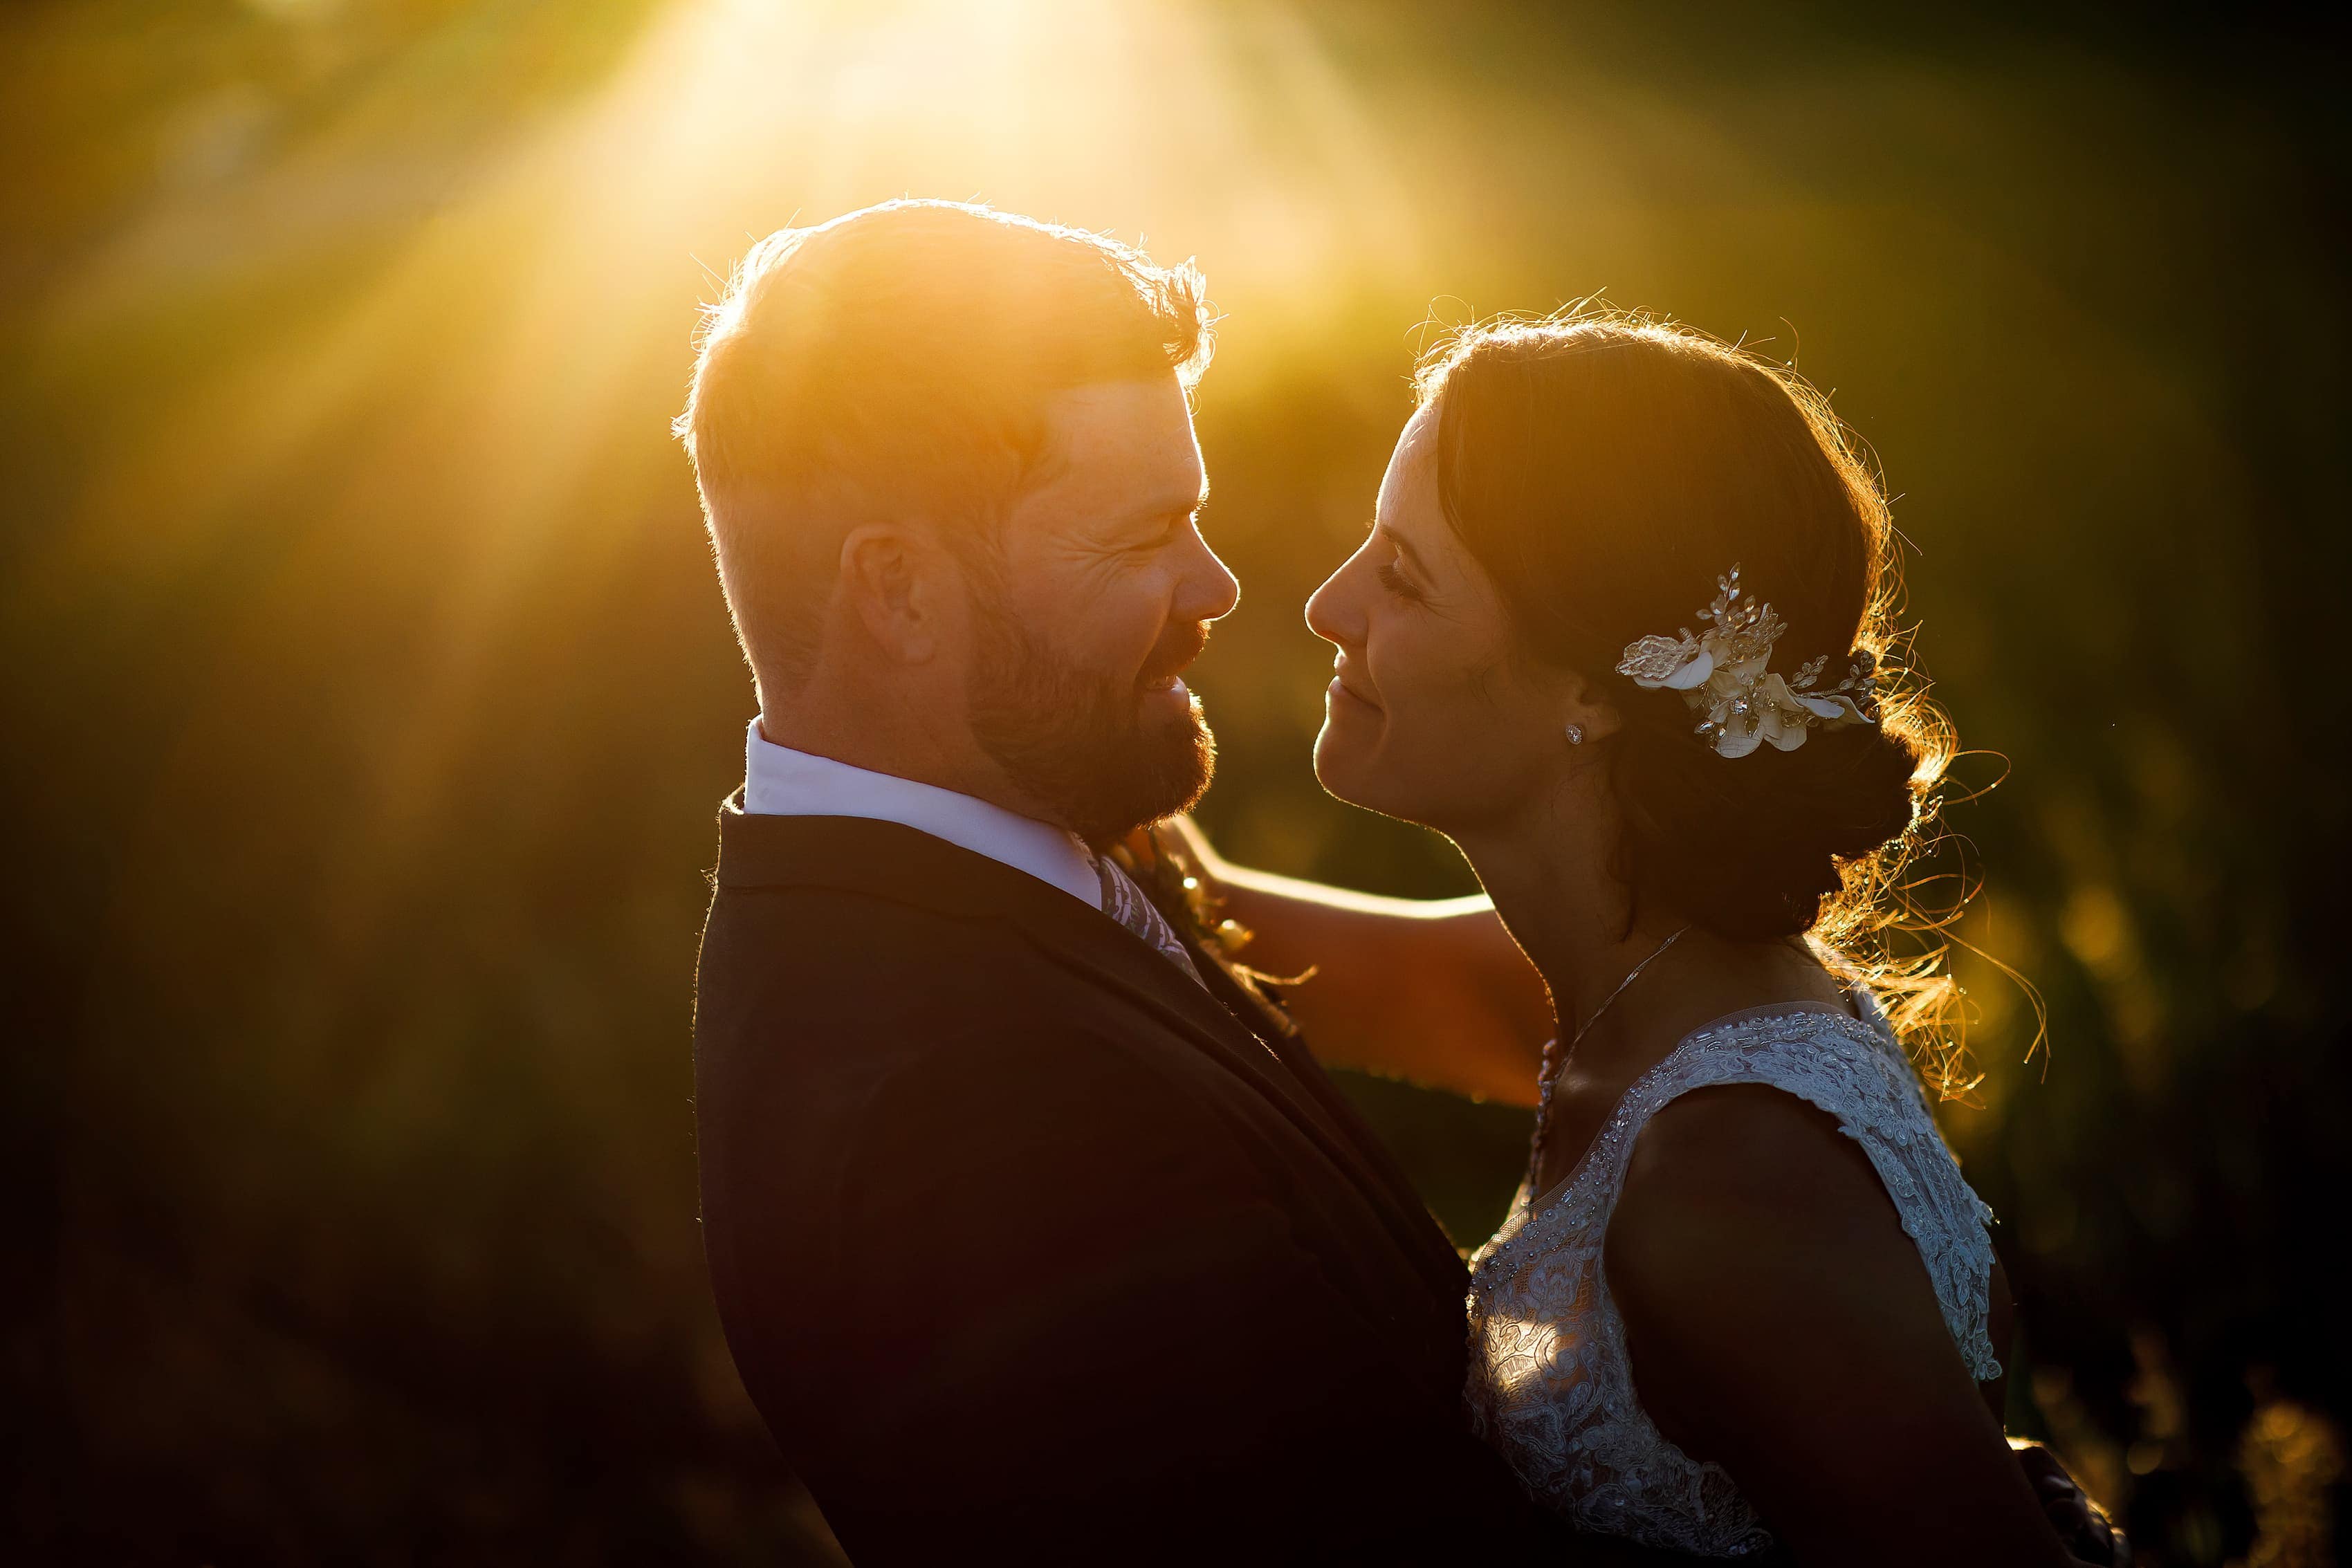 bride and groom pose for sunset portraits at Lionsgate Event Center